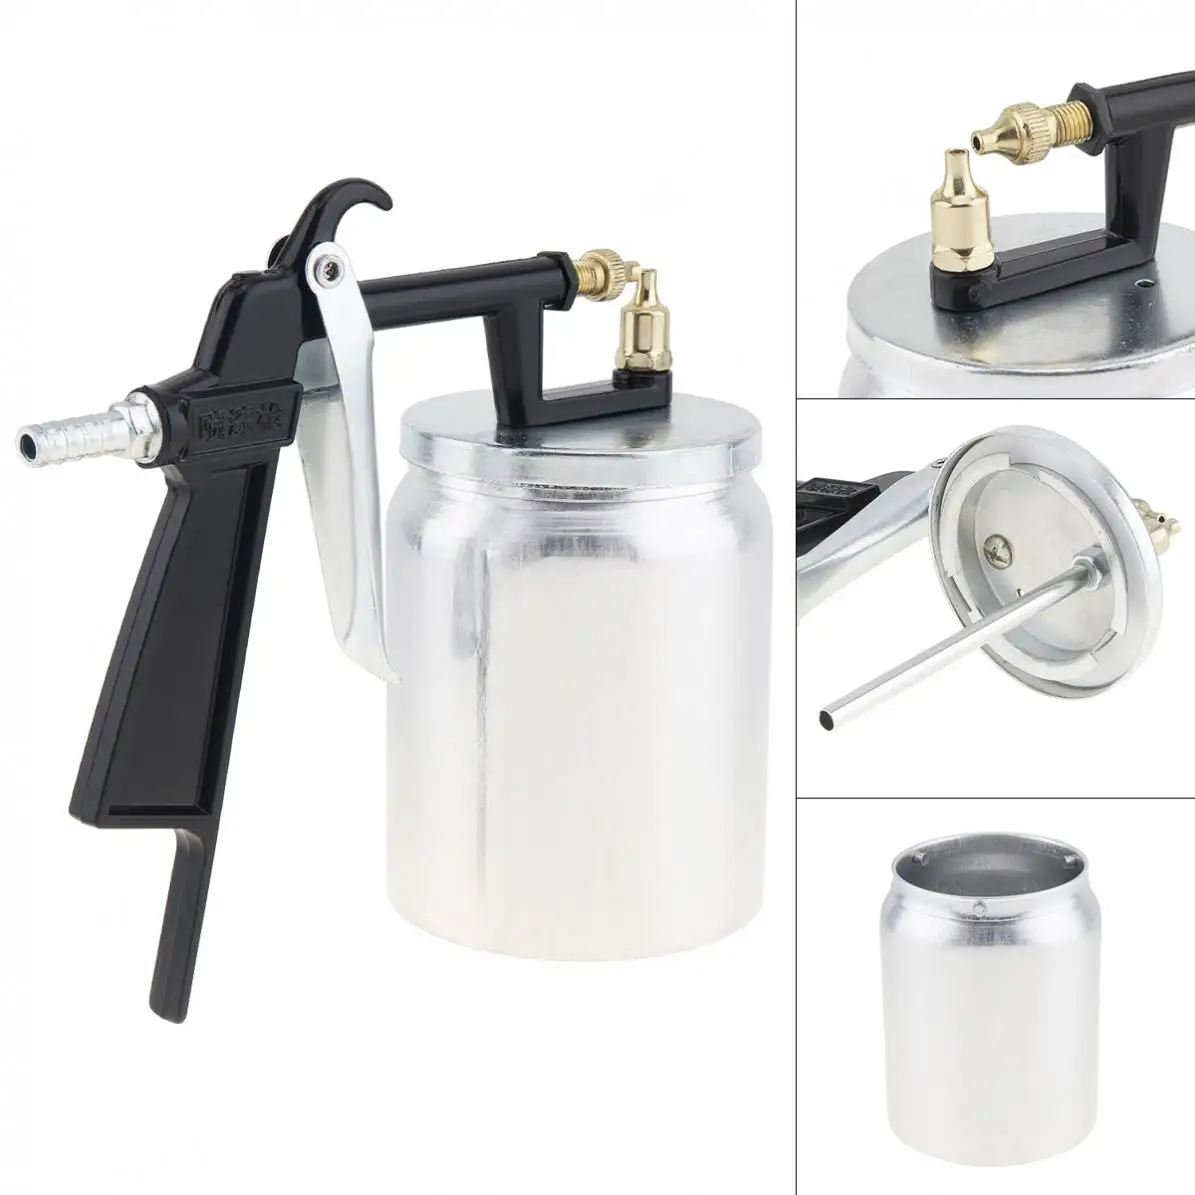 Spray Gun Mini Air Paint Spray Gun with 2.5mm Nozzle Caliber and Aluminum Pot for Furniture Leather Clothing Spray fireray dia 32mm laser nozzle single double layer caliber 0 8 5 0 thread m14 for fiber laser cutting head